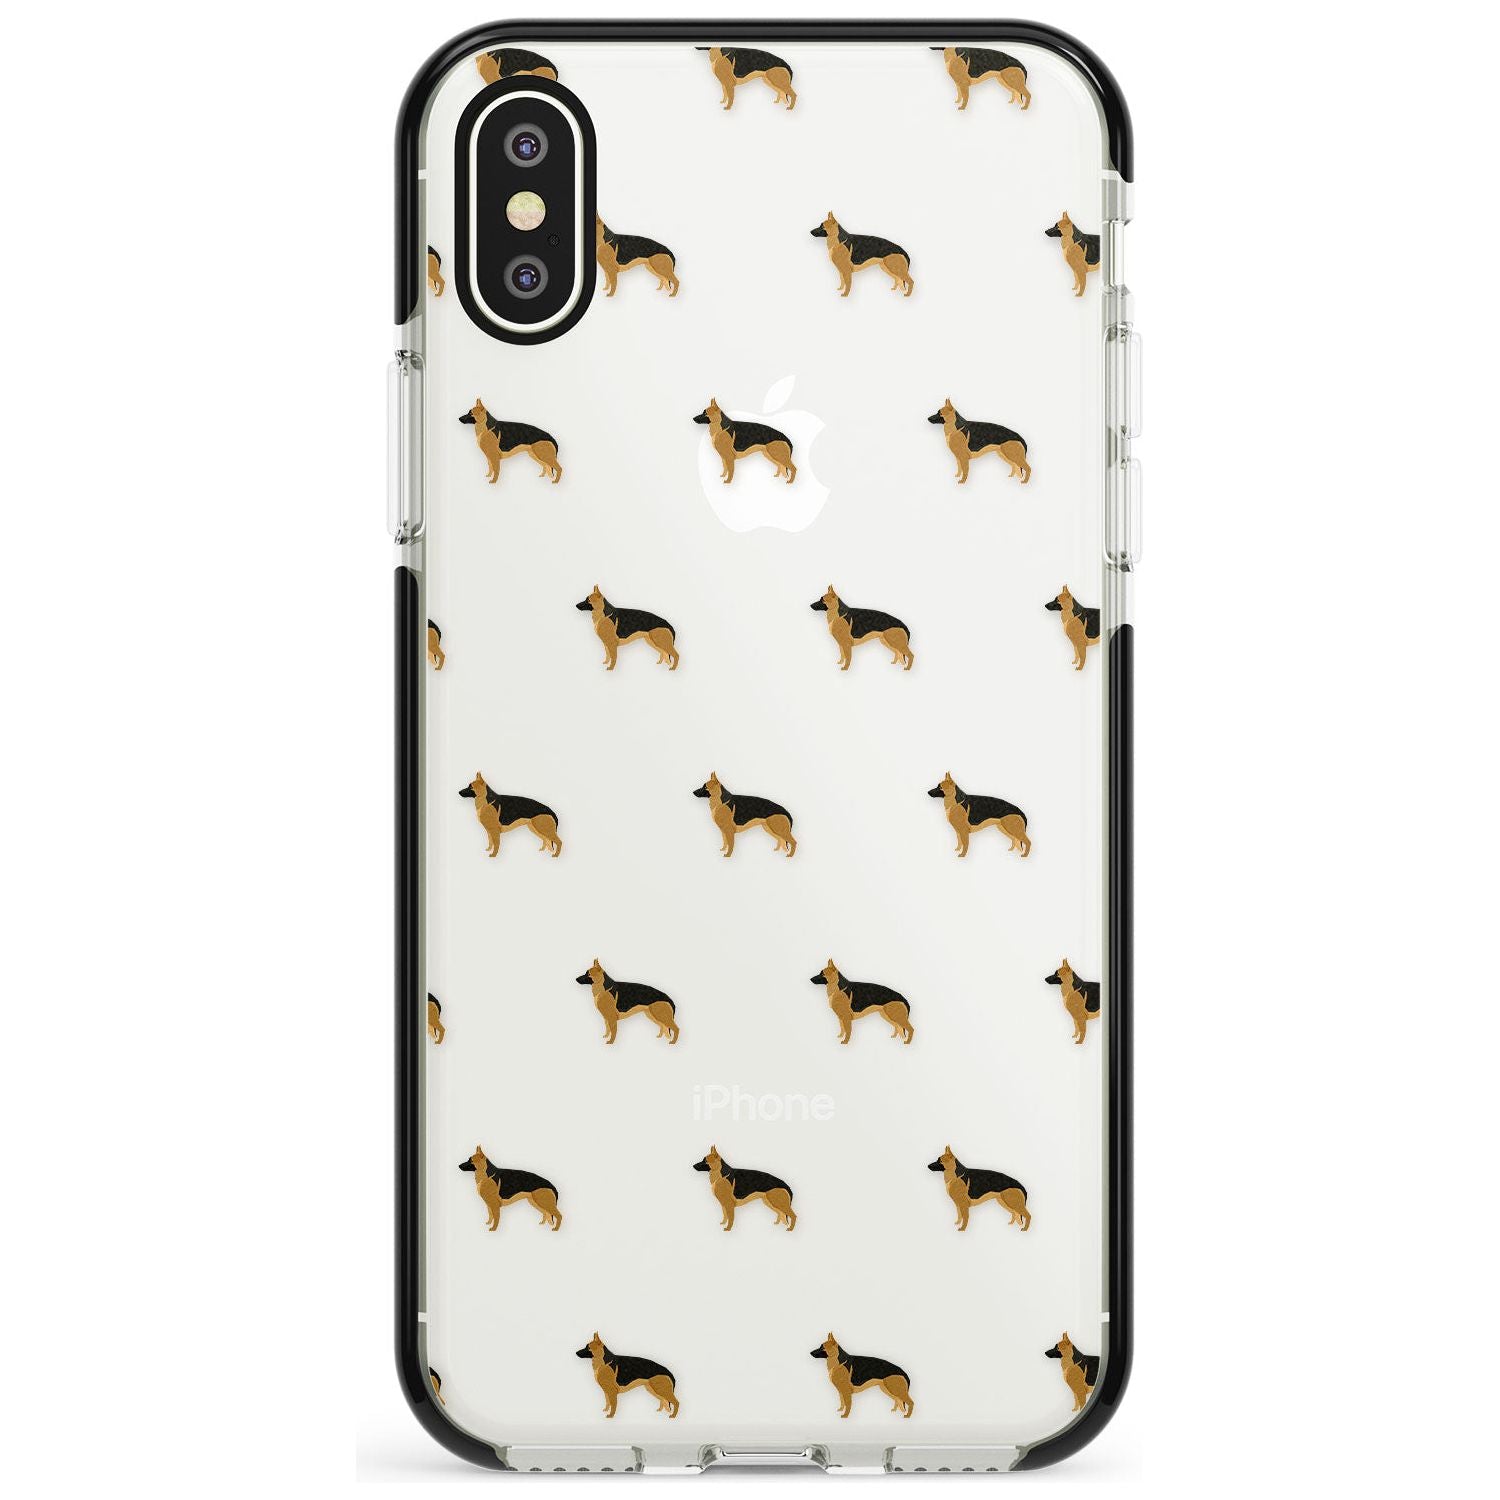 German Sherpard Dog Pattern Clear Black Impact Phone Case for iPhone X XS Max XR